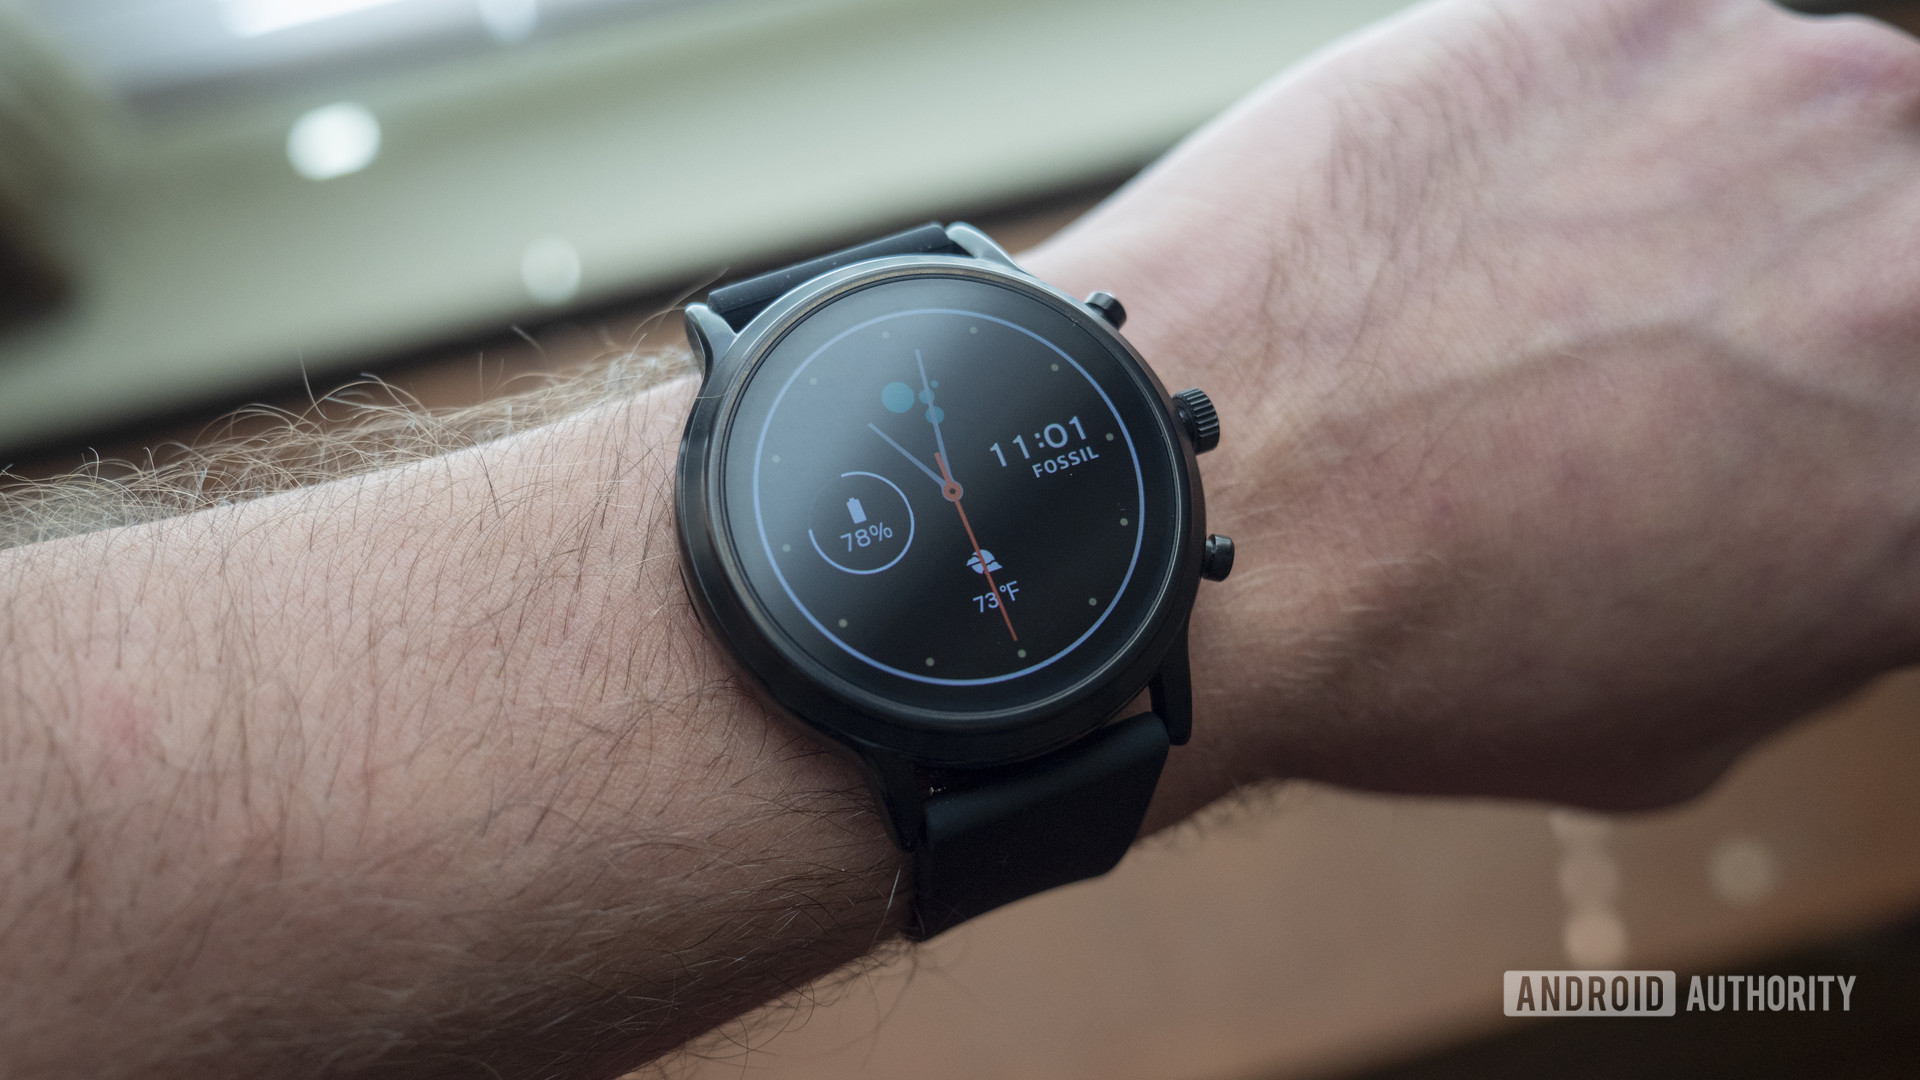 fossil gen 5 smartwatch review on wrist watch face display 4